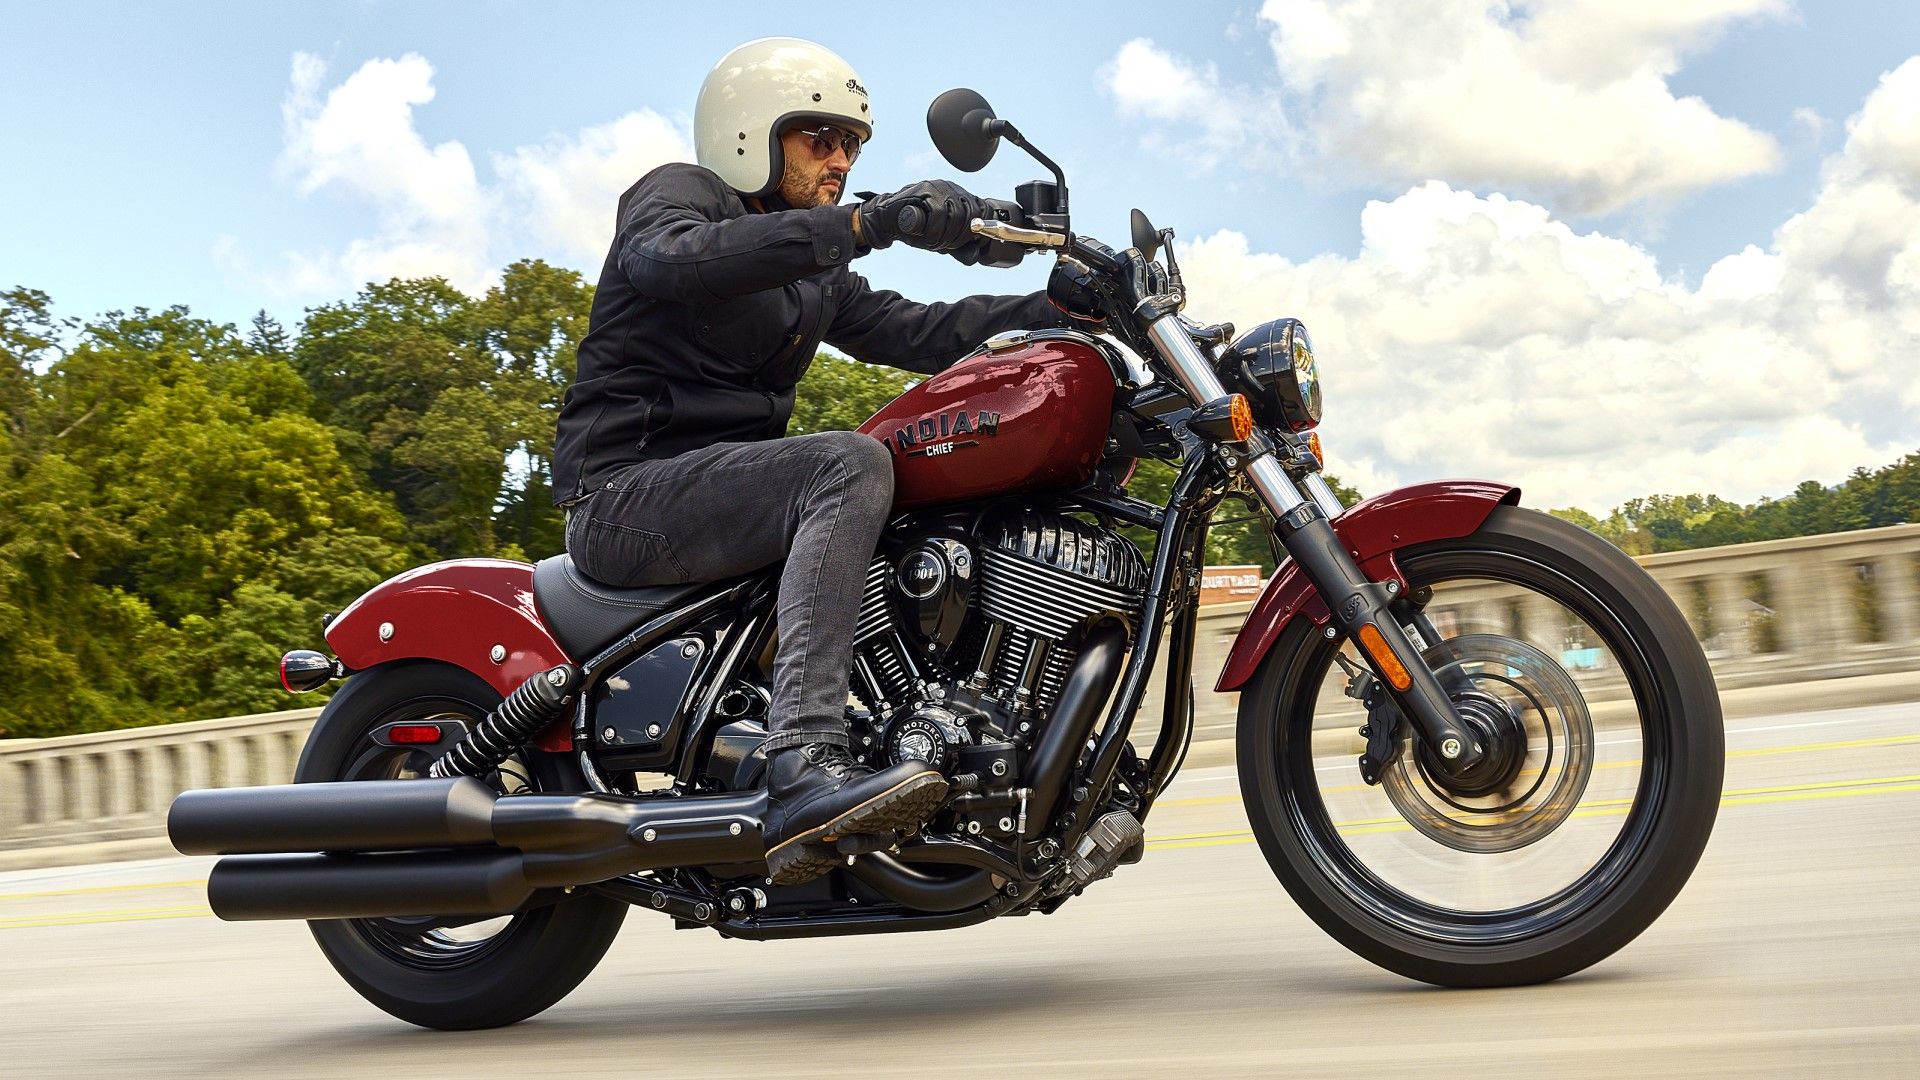 2024 Indian Chief Dark Horse in red accelerating side profile view